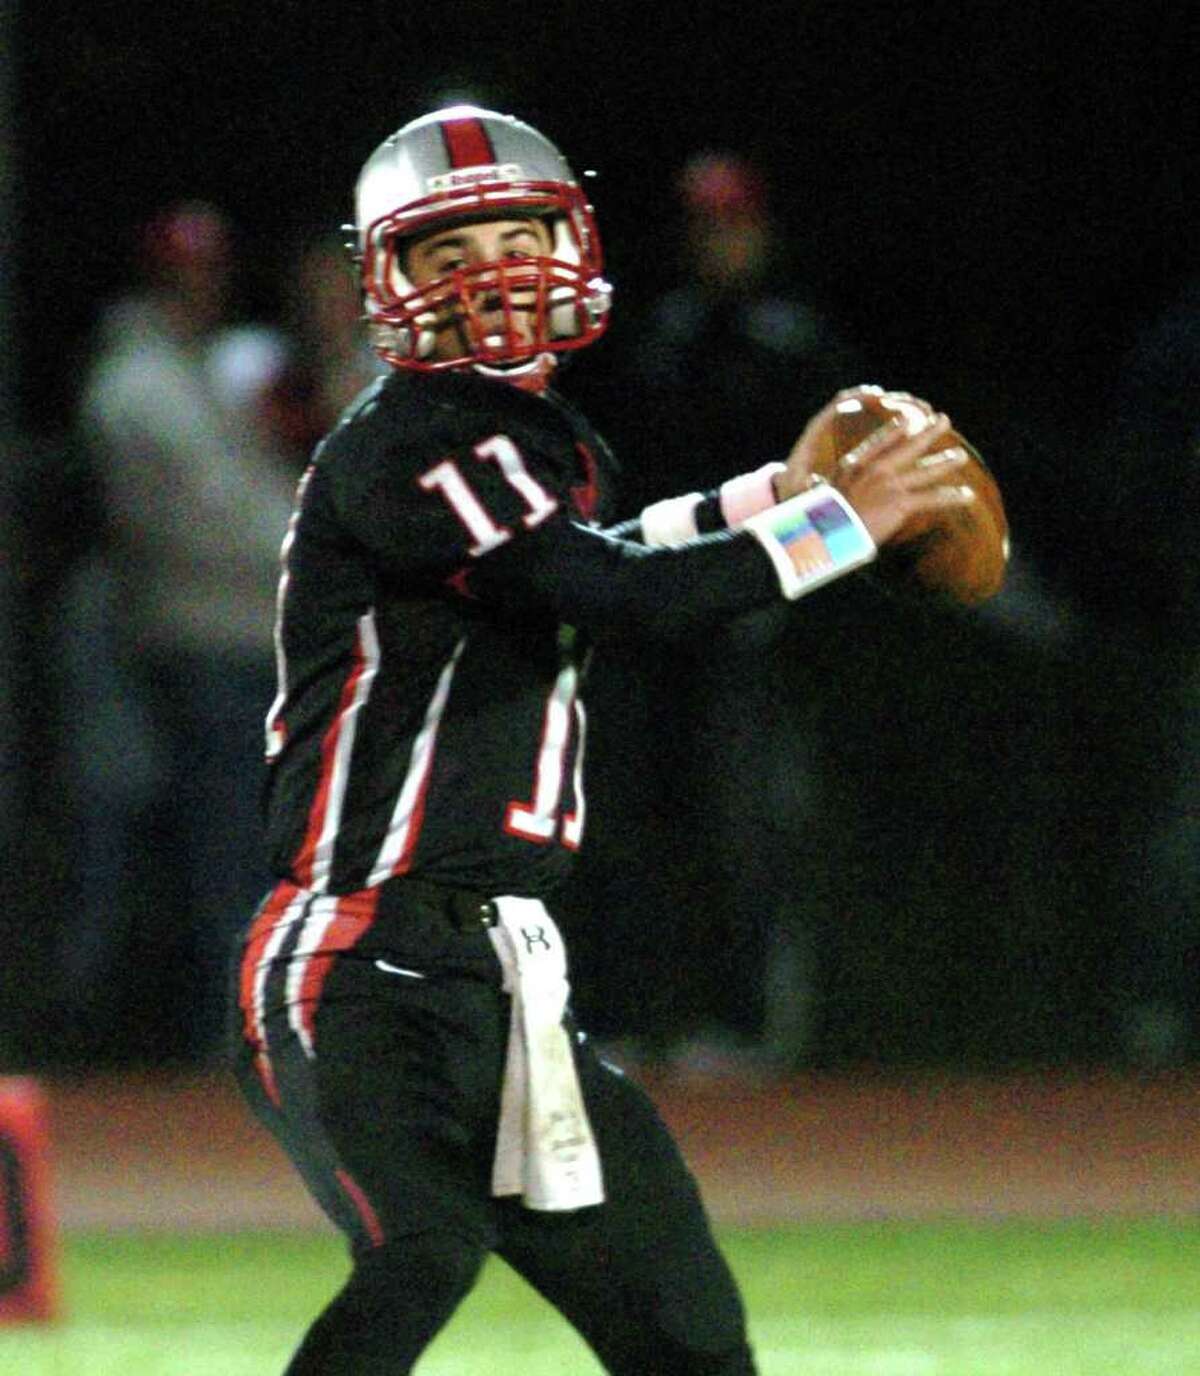 Pomperaug's 11, Kellen Croce sets up for a pass during the football game against Brookfield at Southbury High School Nov. 5, 2010.